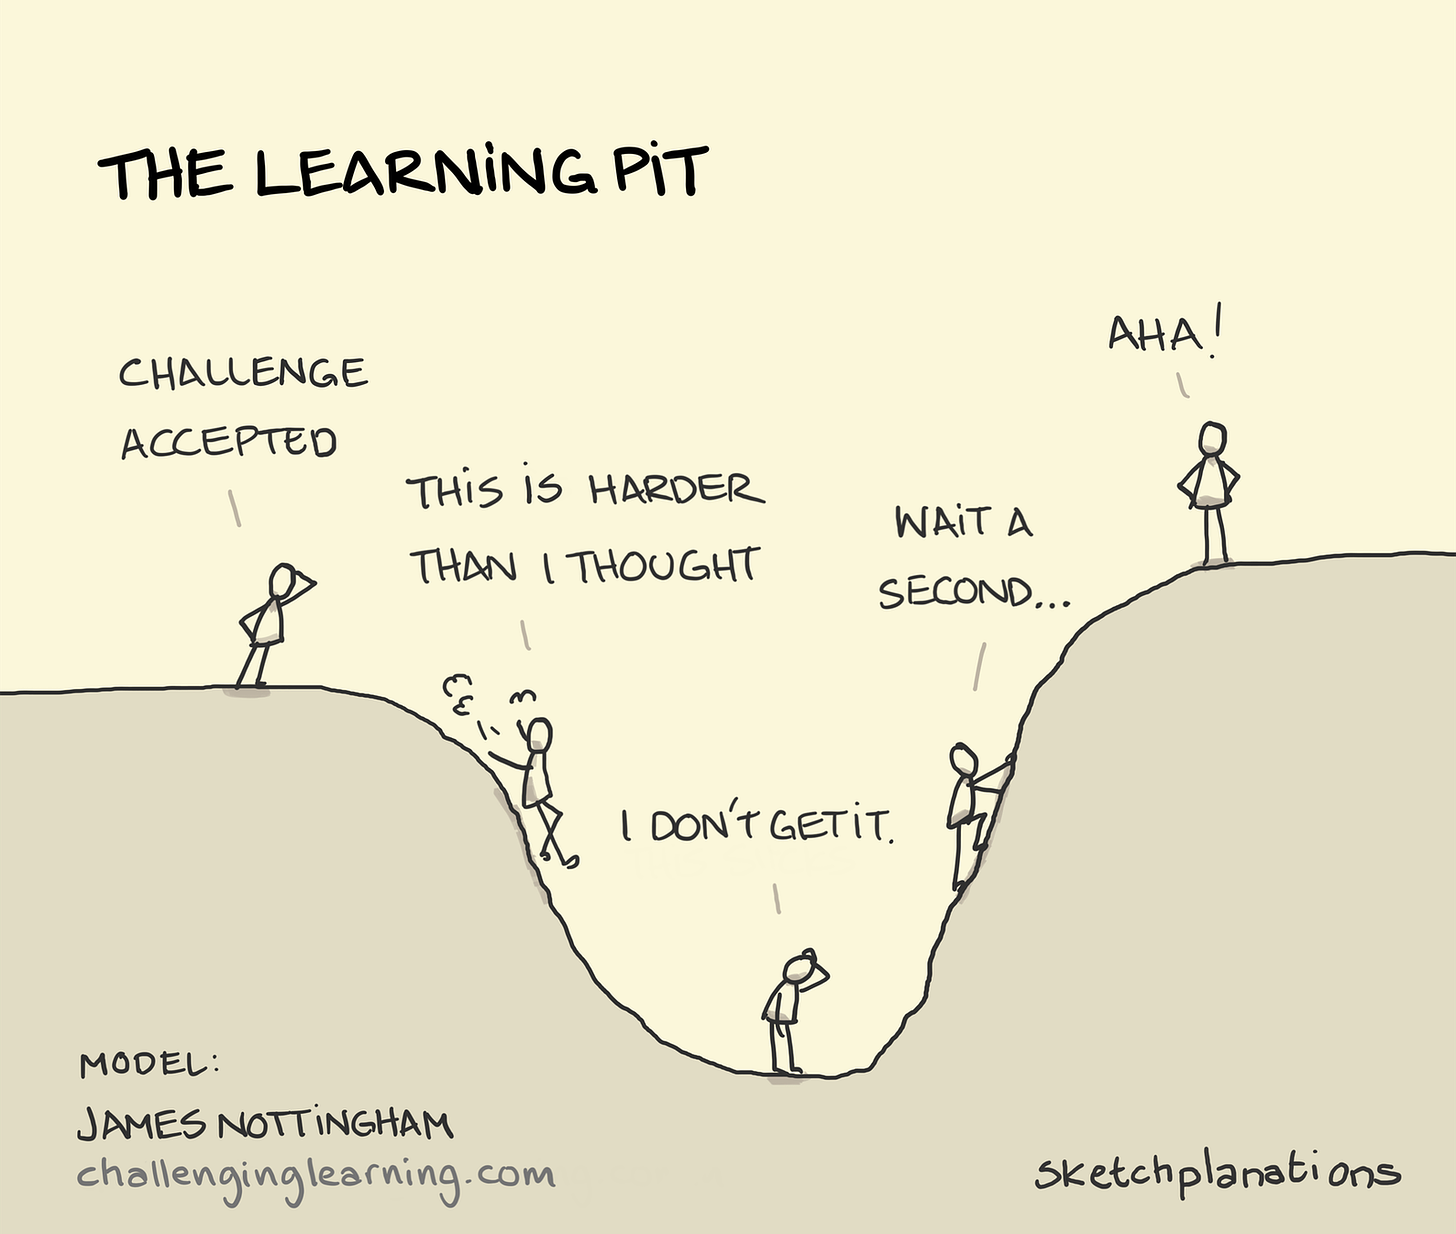 The Learning Pit - Sketchplanations